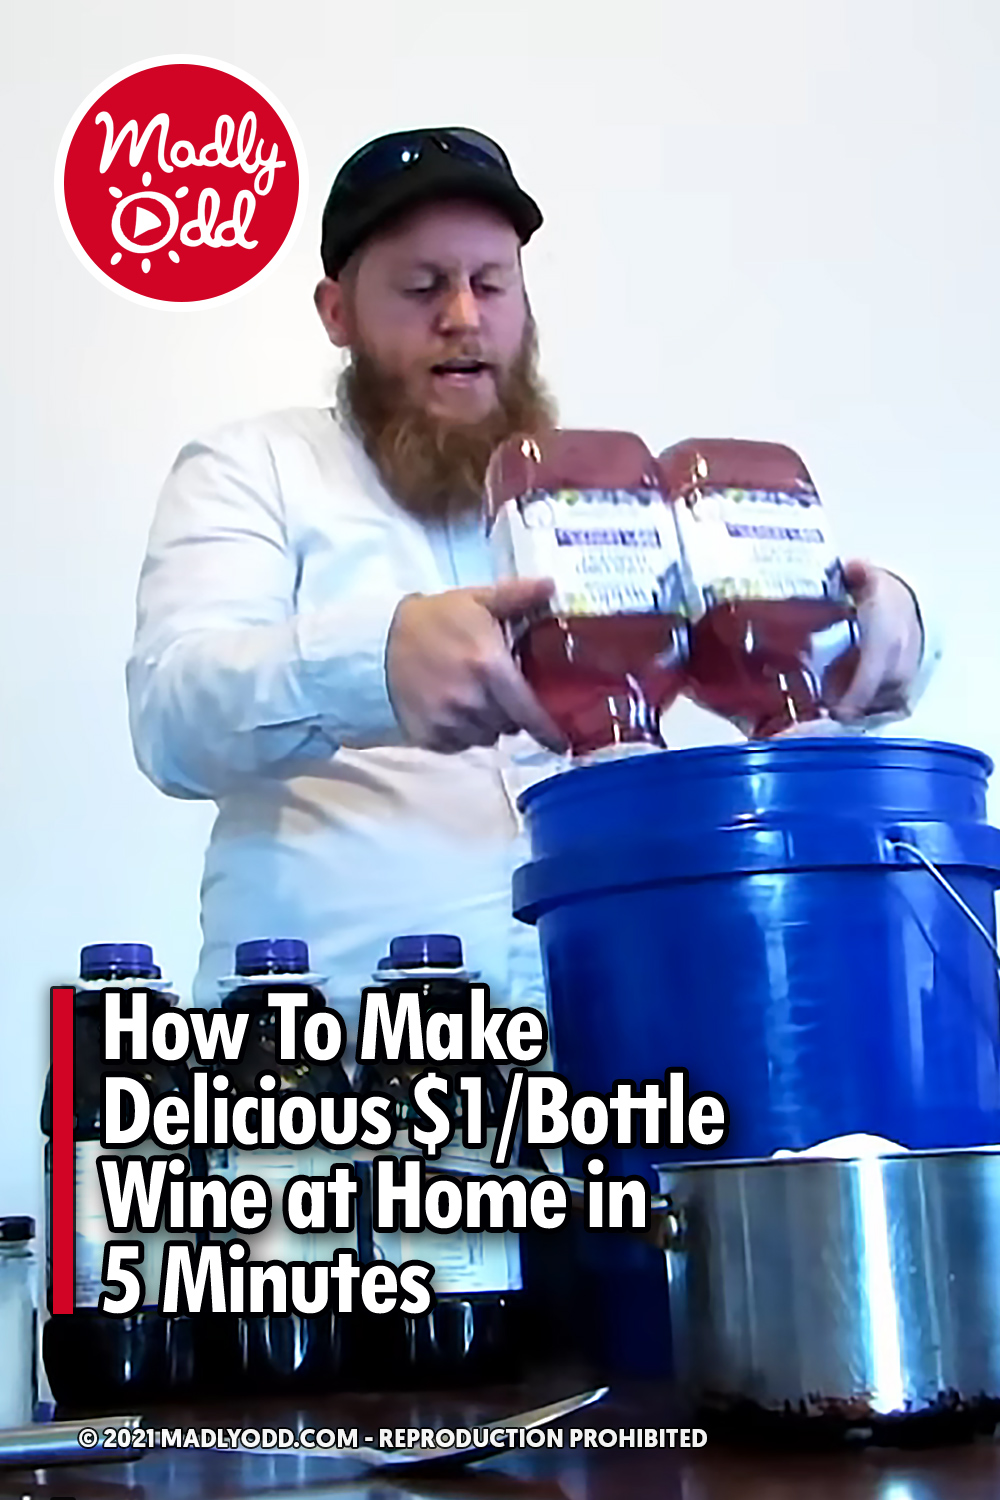 How To Make Delicious $1/Bottle Wine at Home in 5 Minutes